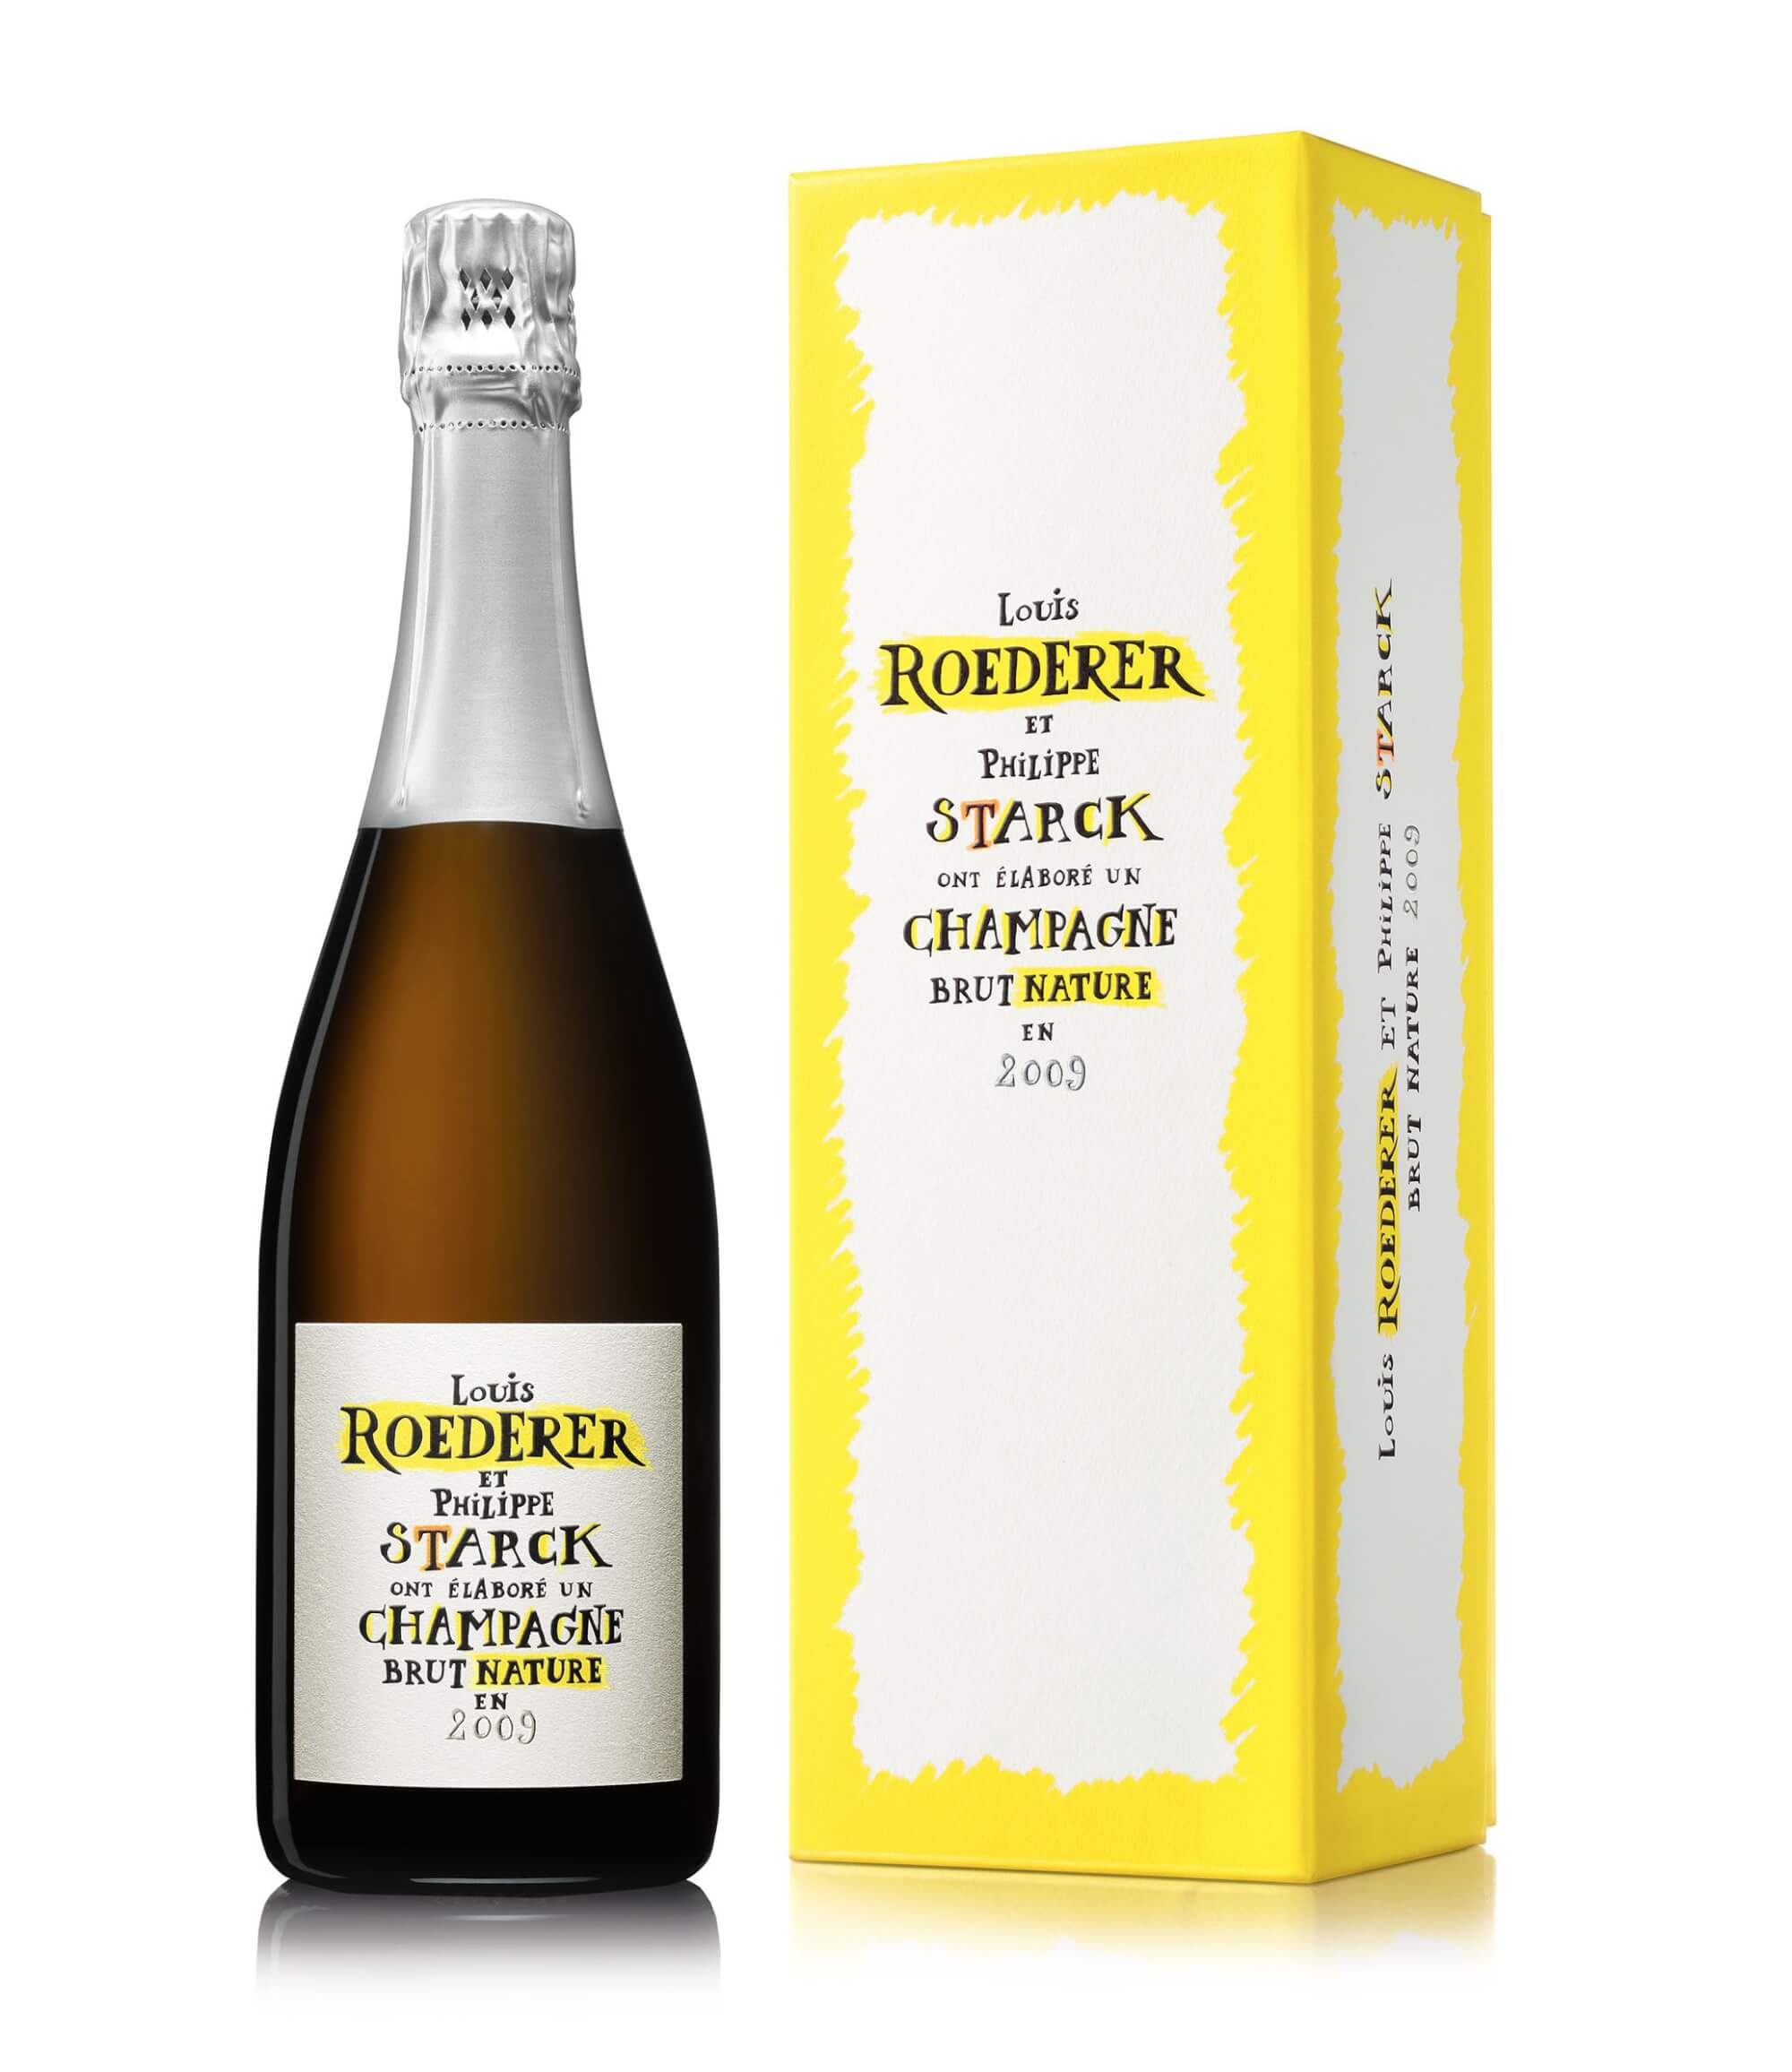 Philippe Starck and Maison Louis Roederer, a new collaboration for Brut Nature 2009